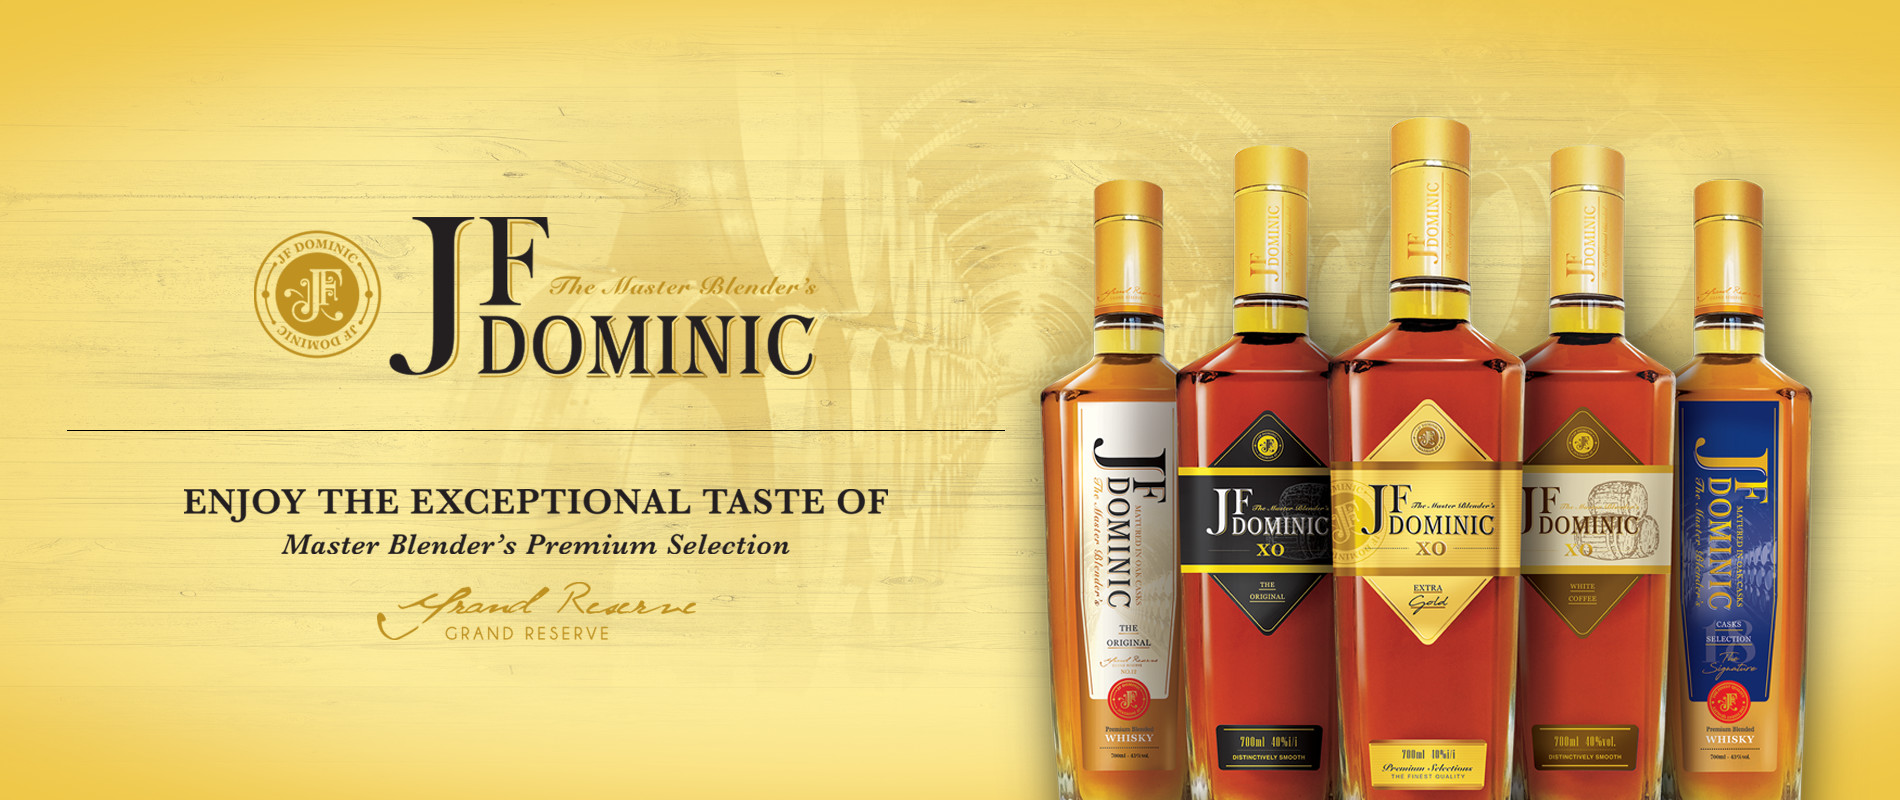 JF Dominic Series let us Enjoy the Exceptional Tatse of Master Blender's Premium Selection